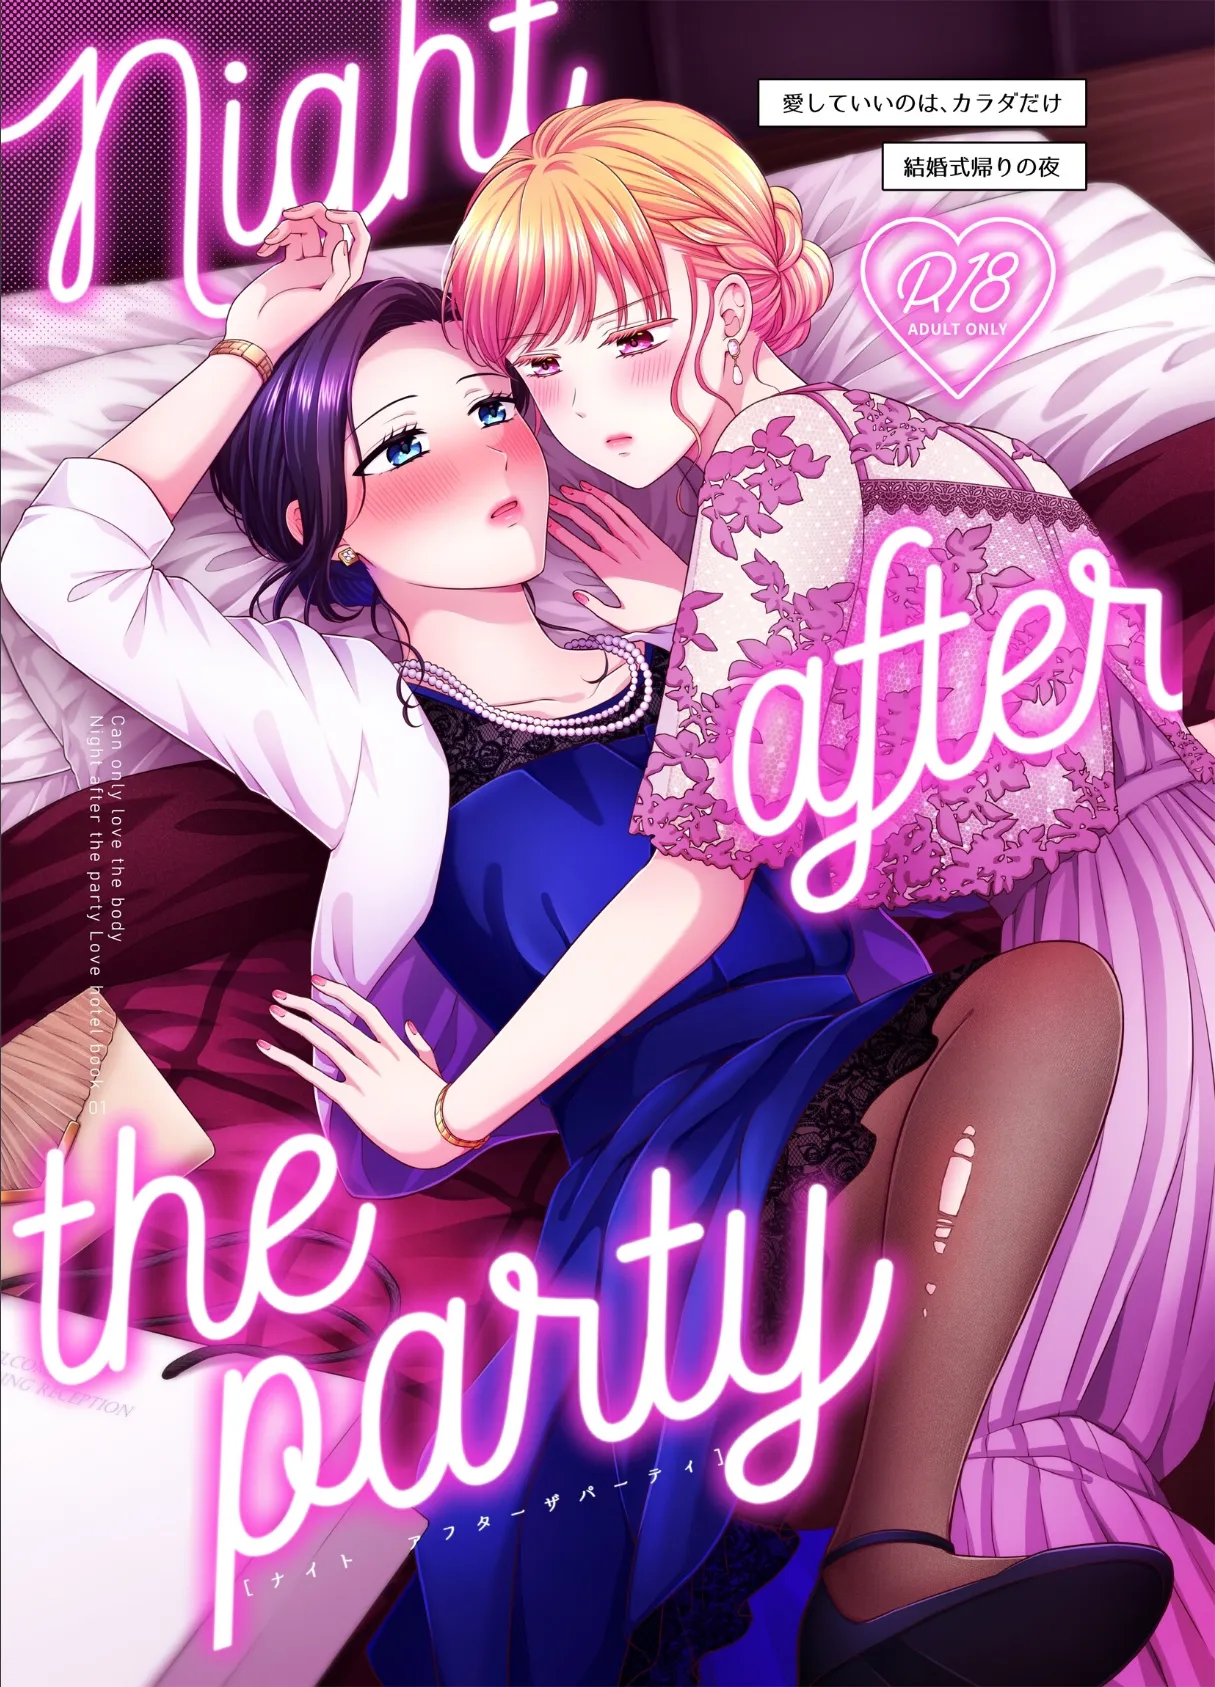 Night after the party/結婚式帰りの夜 1ページ